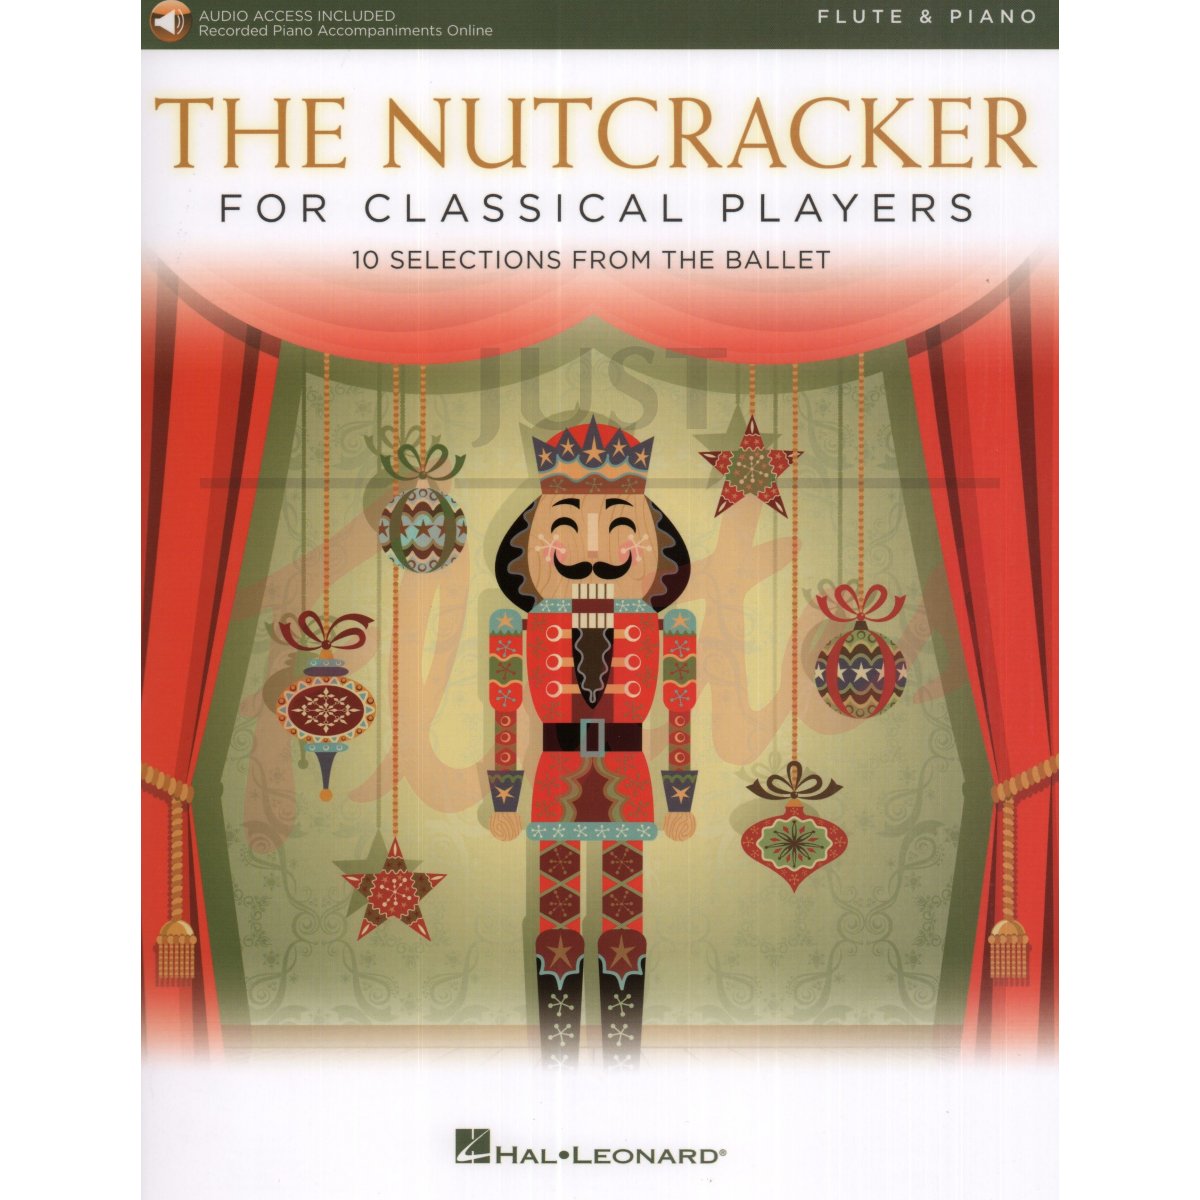 The Nutcracker for Classical Players for Flute and Piano